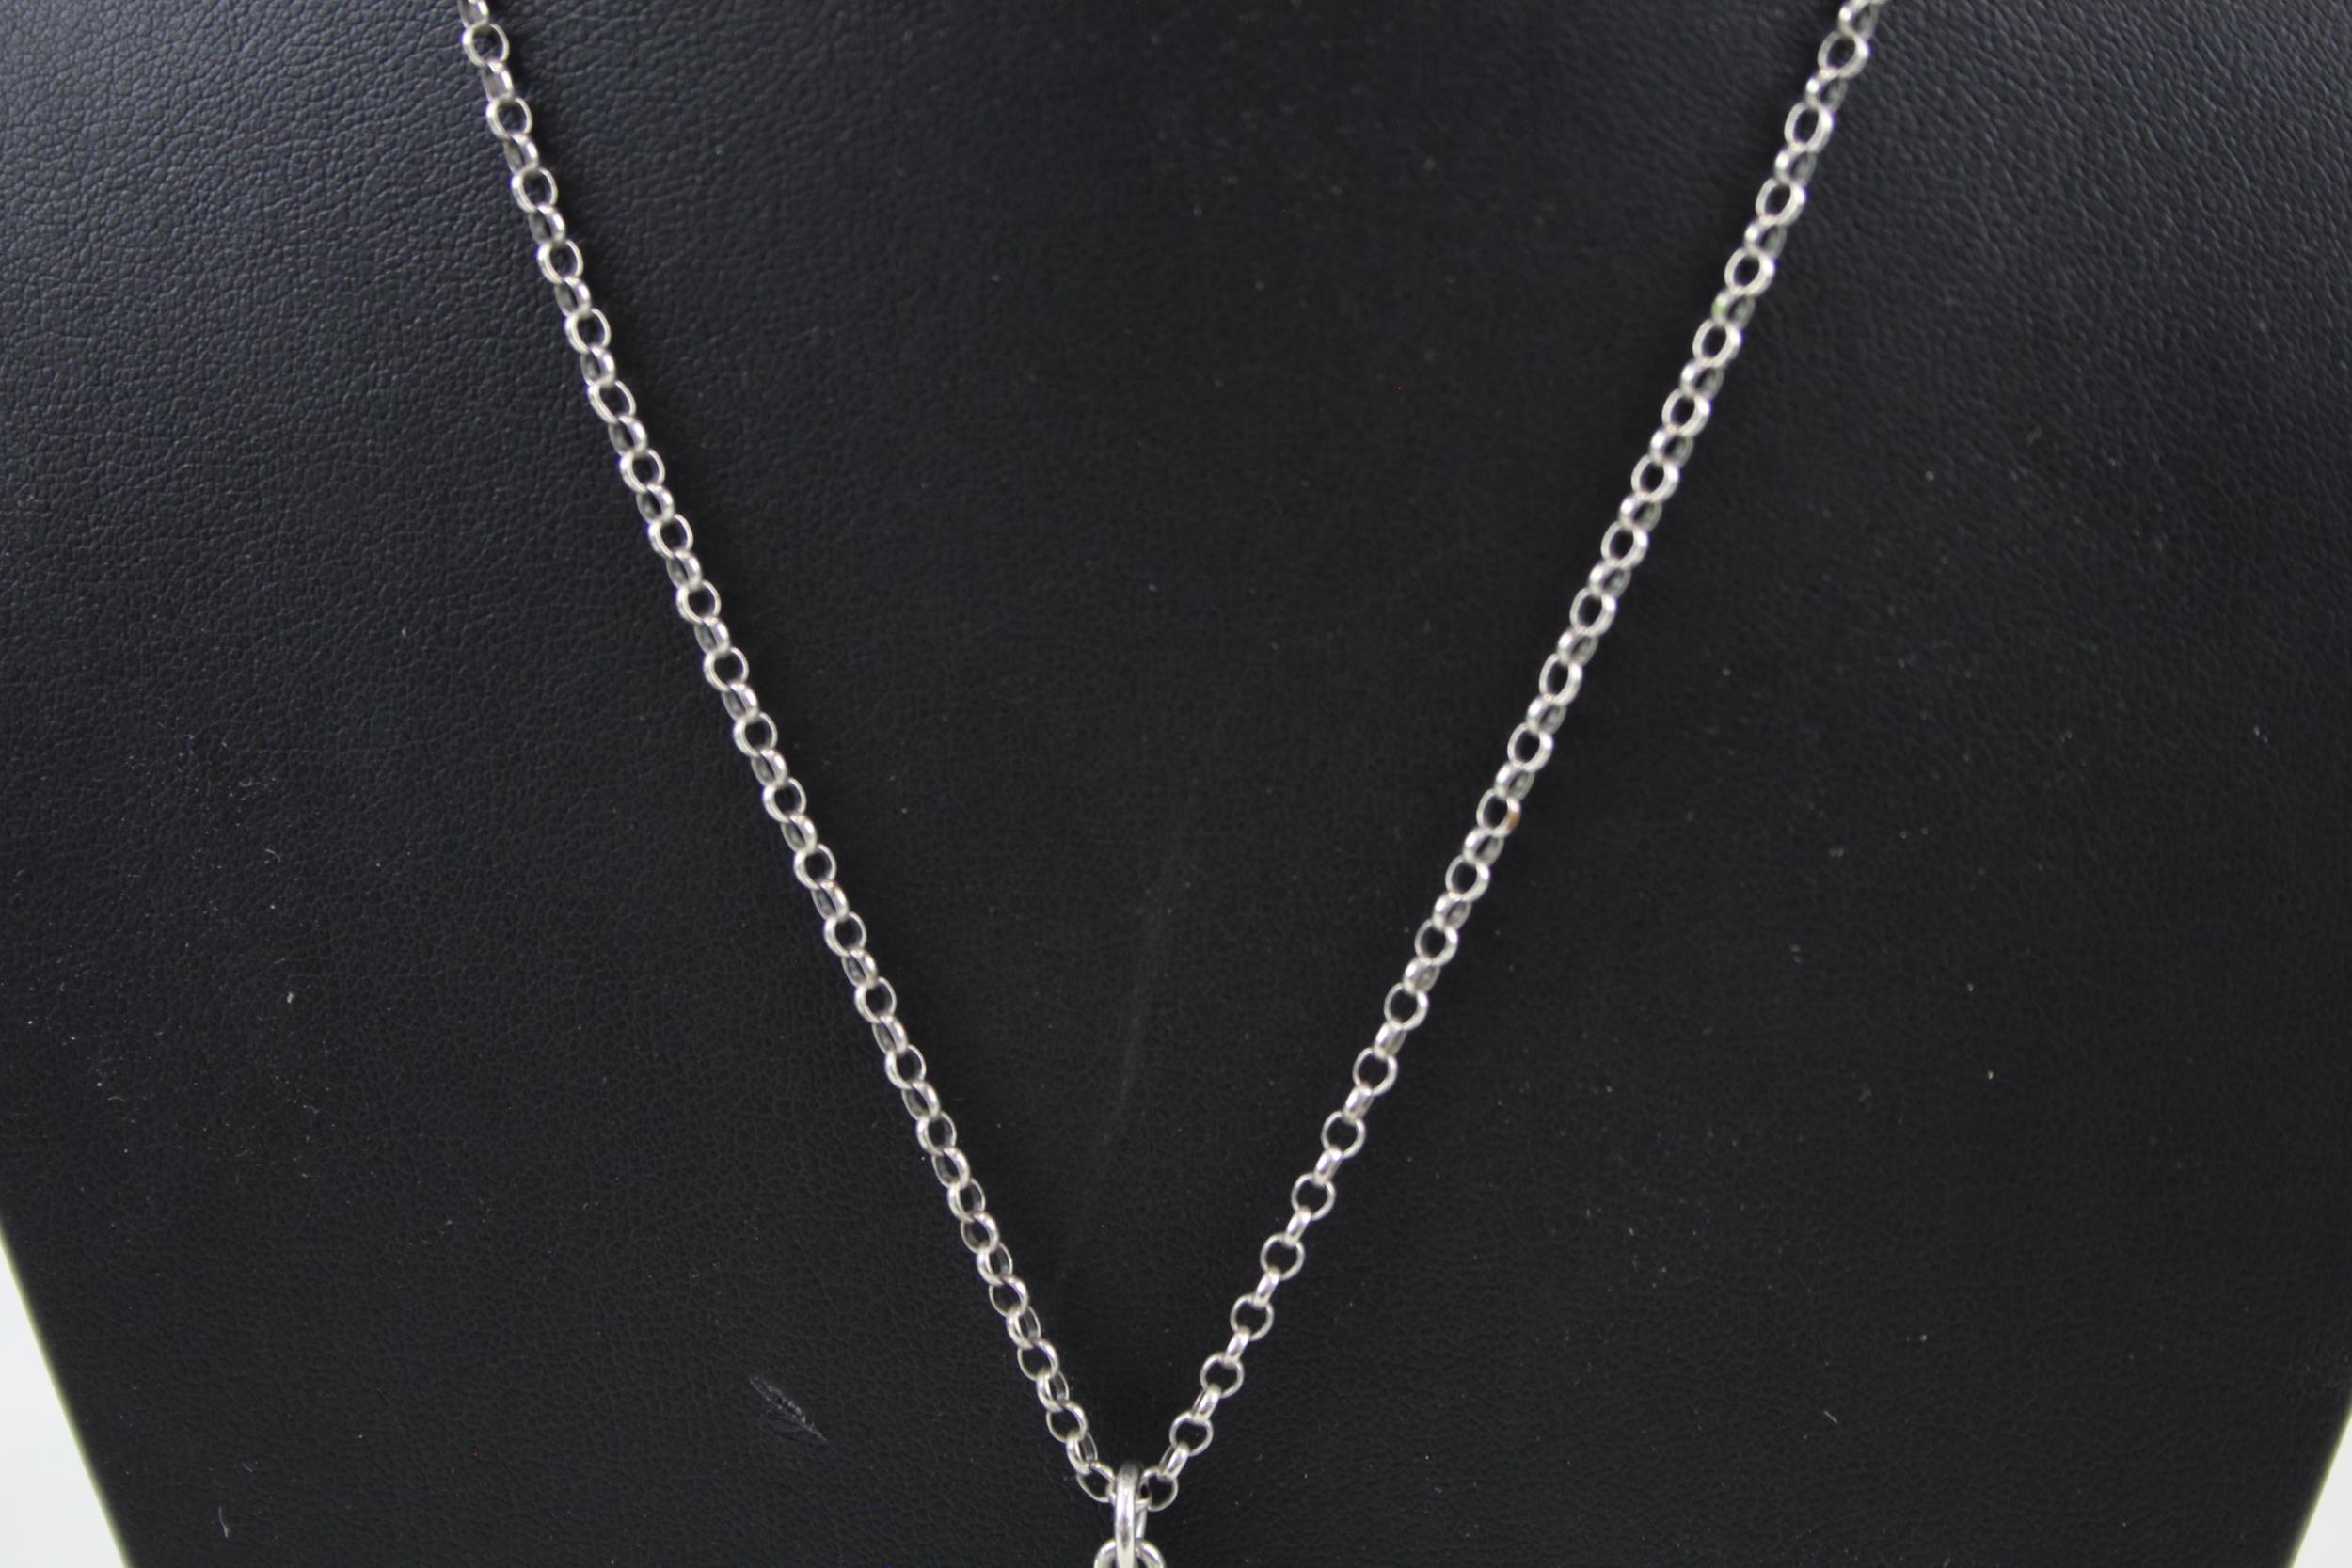 Silver antique cross pendant necklace (9g) - Image 5 of 7